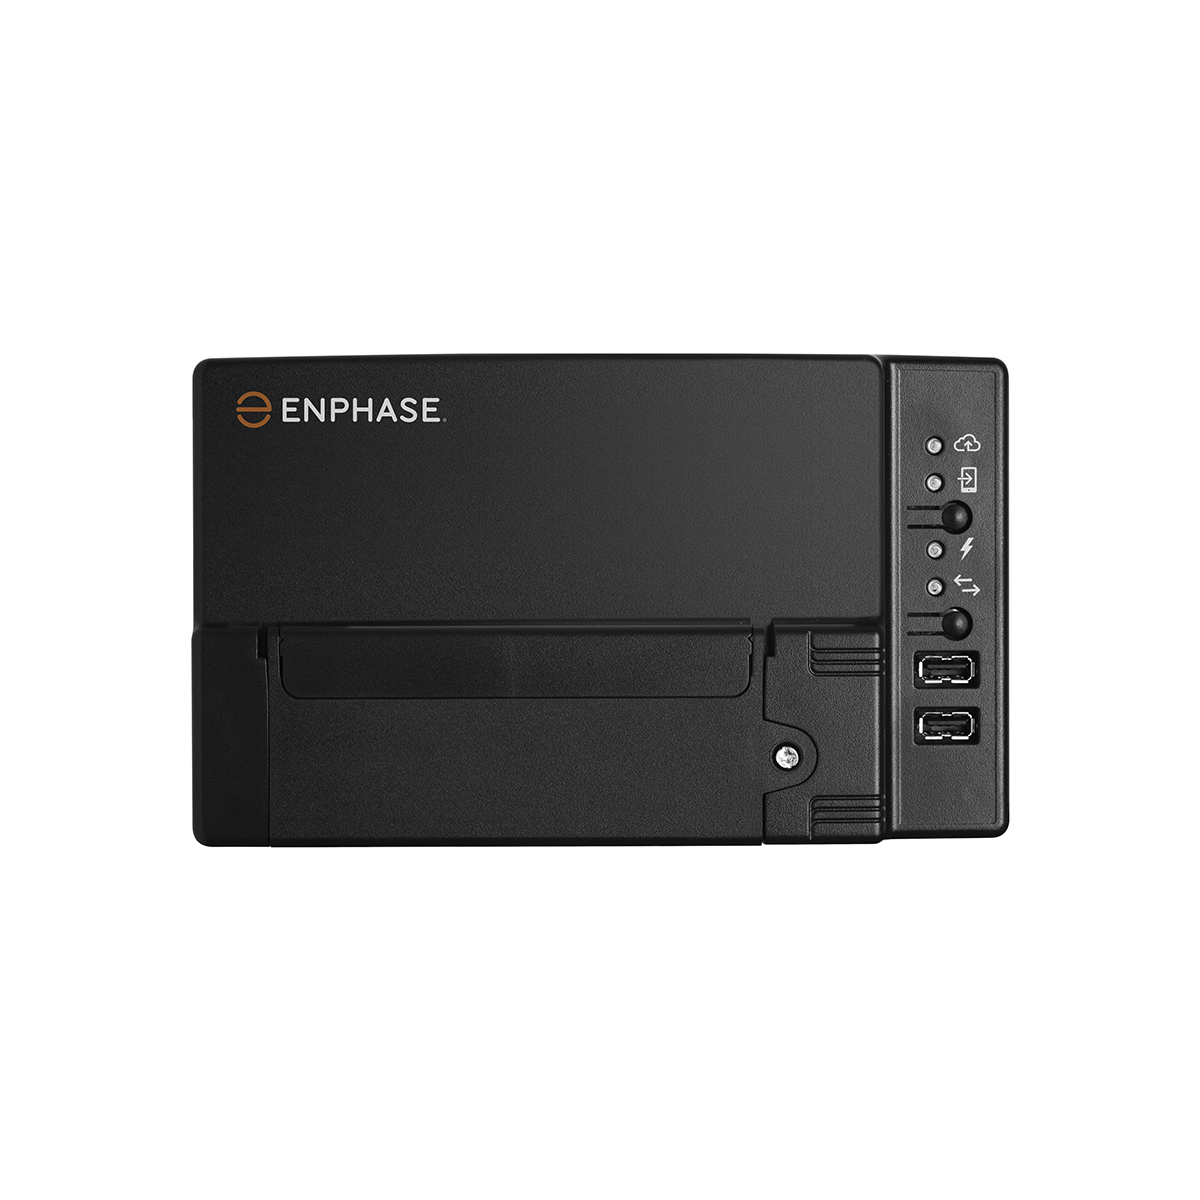 24x Sunpower P6 9720 wp met Enphase IQ8A en Accu 1x N Charge 10T,1 x N Charge 3T